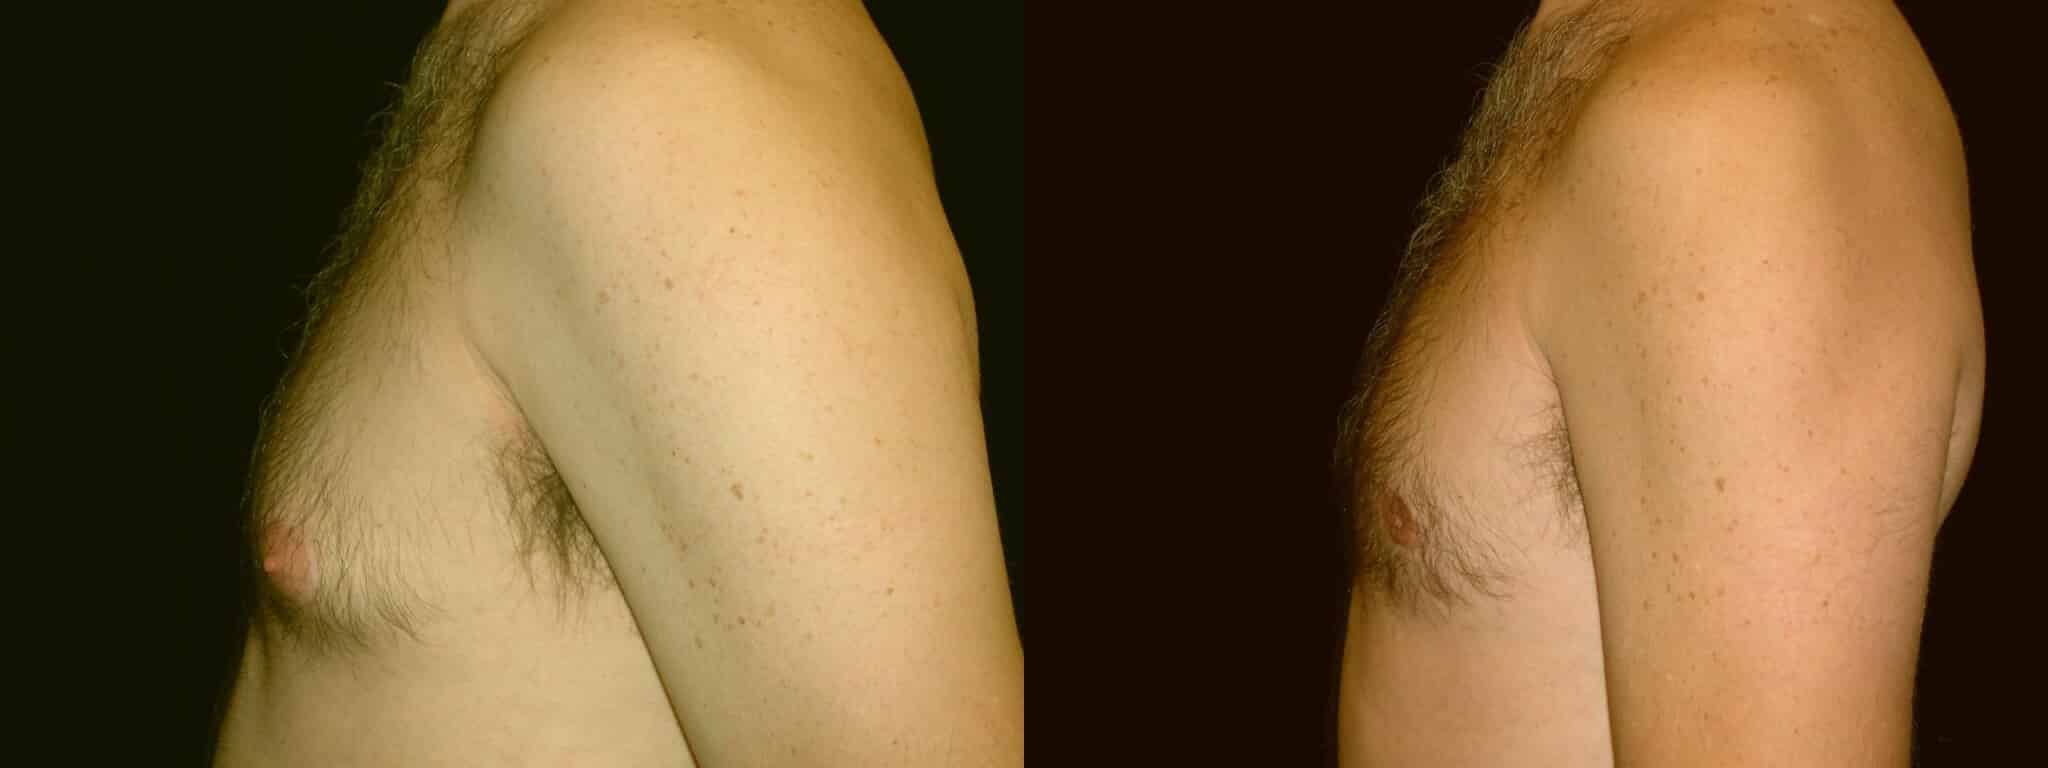 Gynecomastia Patient 3 Before & After Details